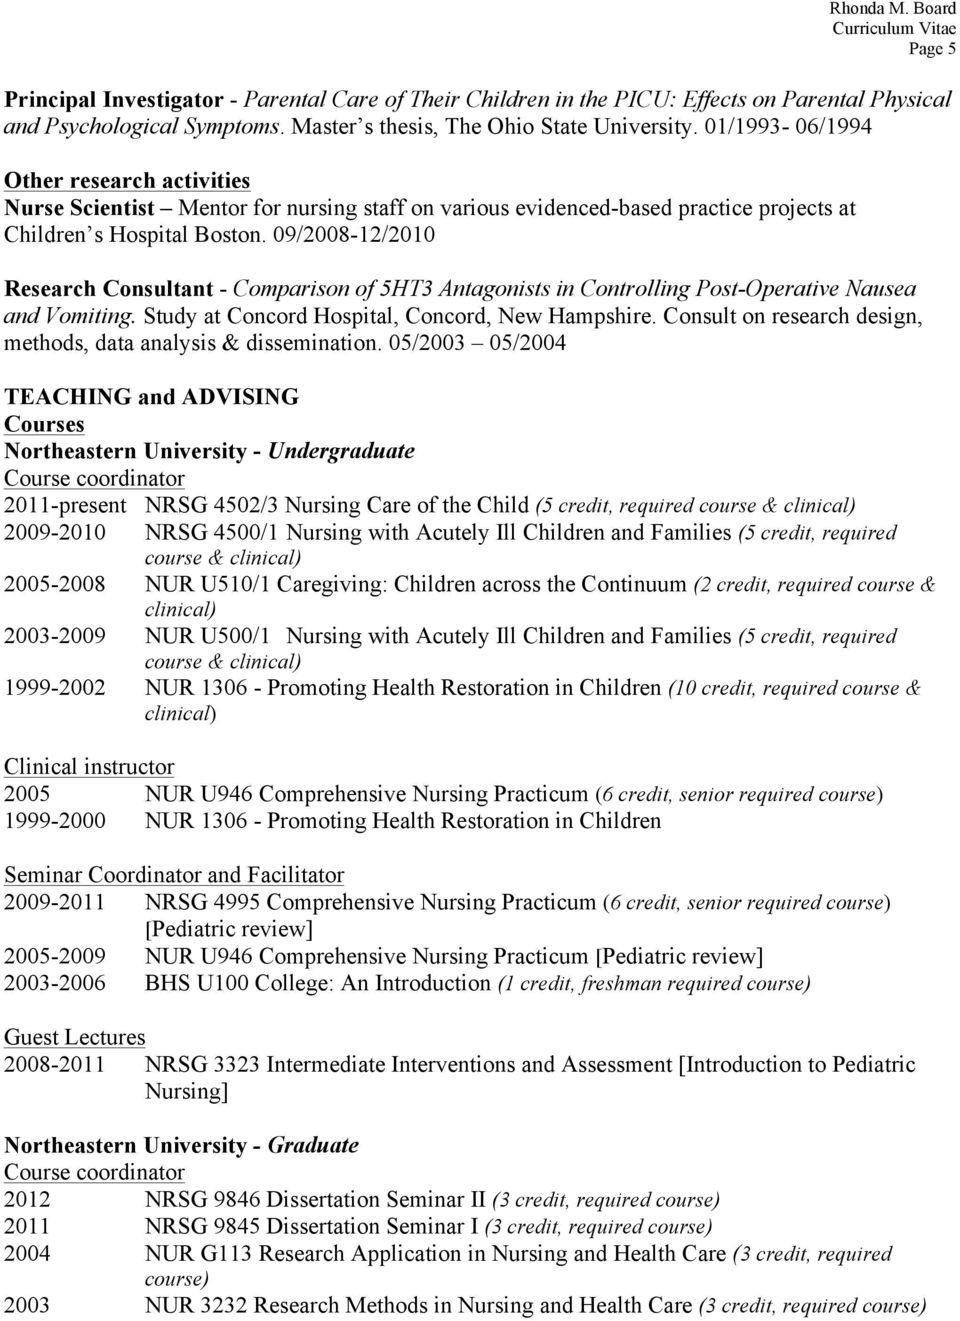 09/2008-12/2010 Research Consultant - Comparison of 5HT3 Antagonists in Controlling Post-Operative Nausea and Vomiting. Study at Concord Hospital, Concord, New Hampshire.